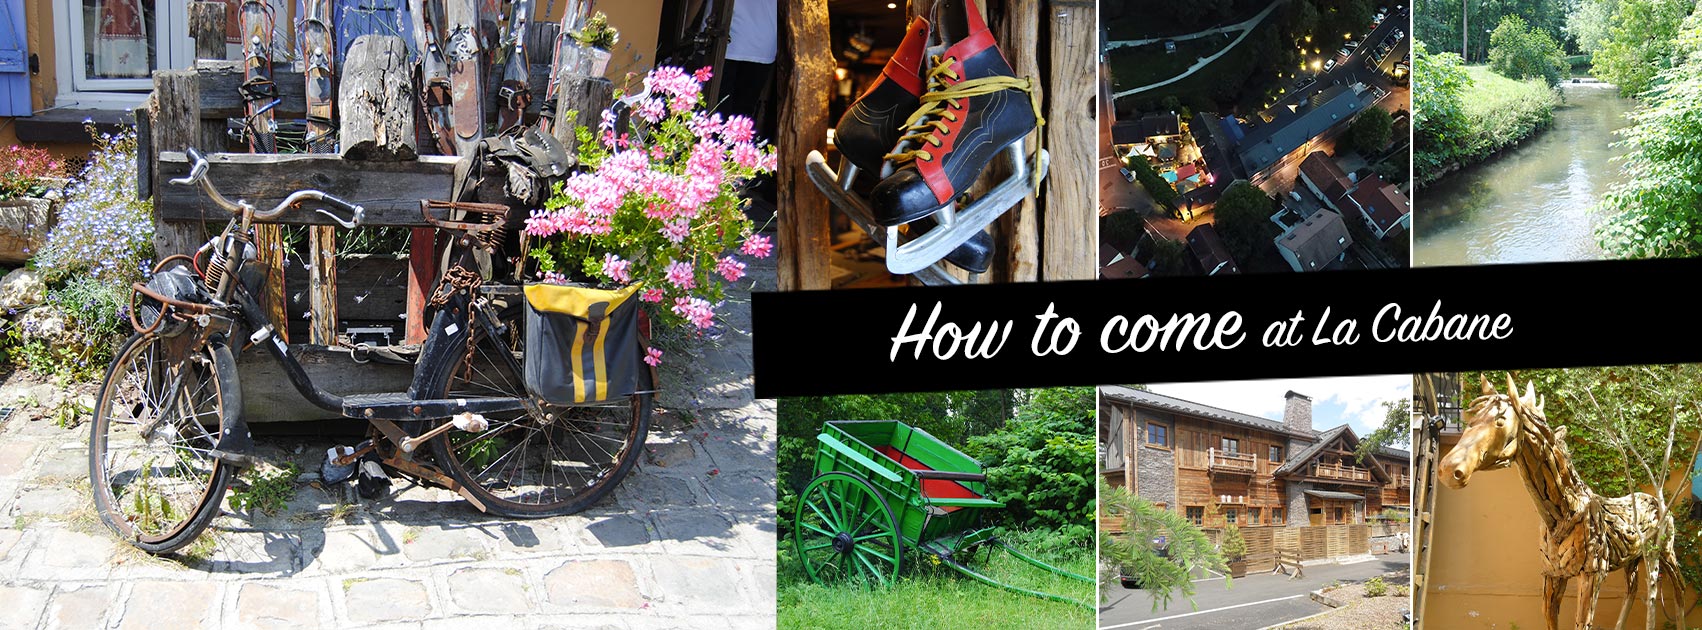 How to come at La Cabane